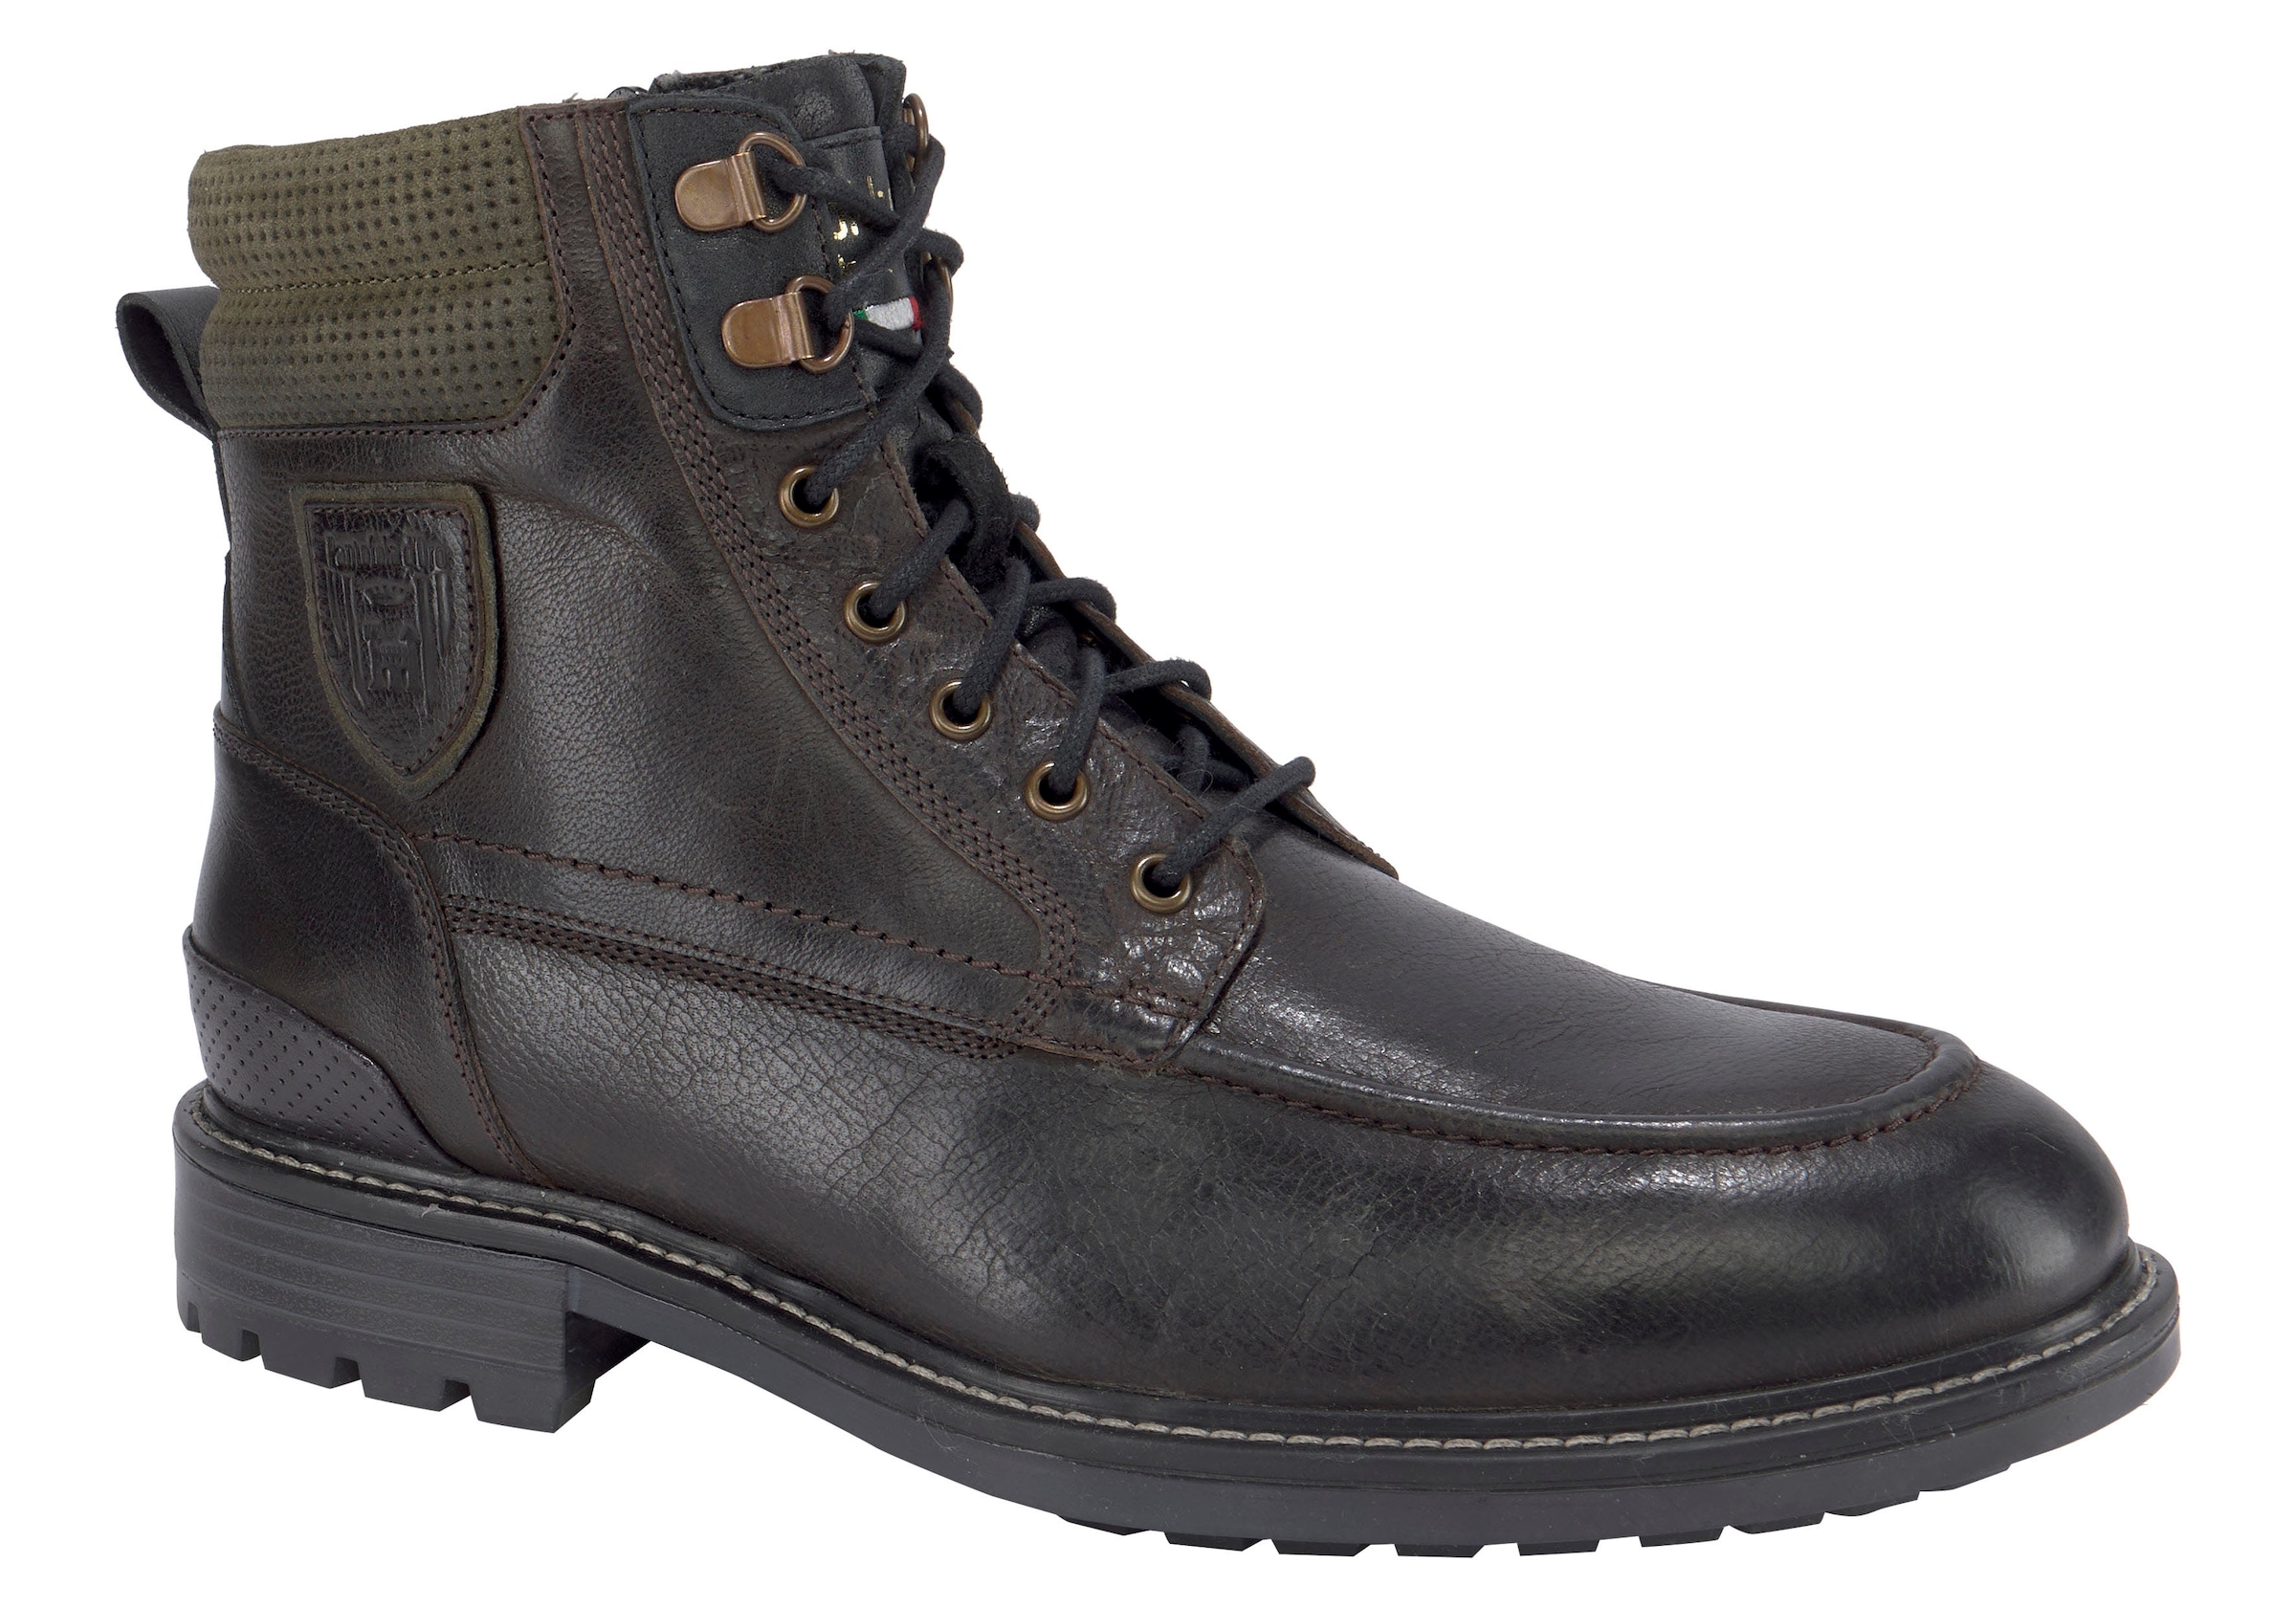 Pantofola d´Oro Schnürboots »MASSI UOMO HIGH«, im Casual Business Look